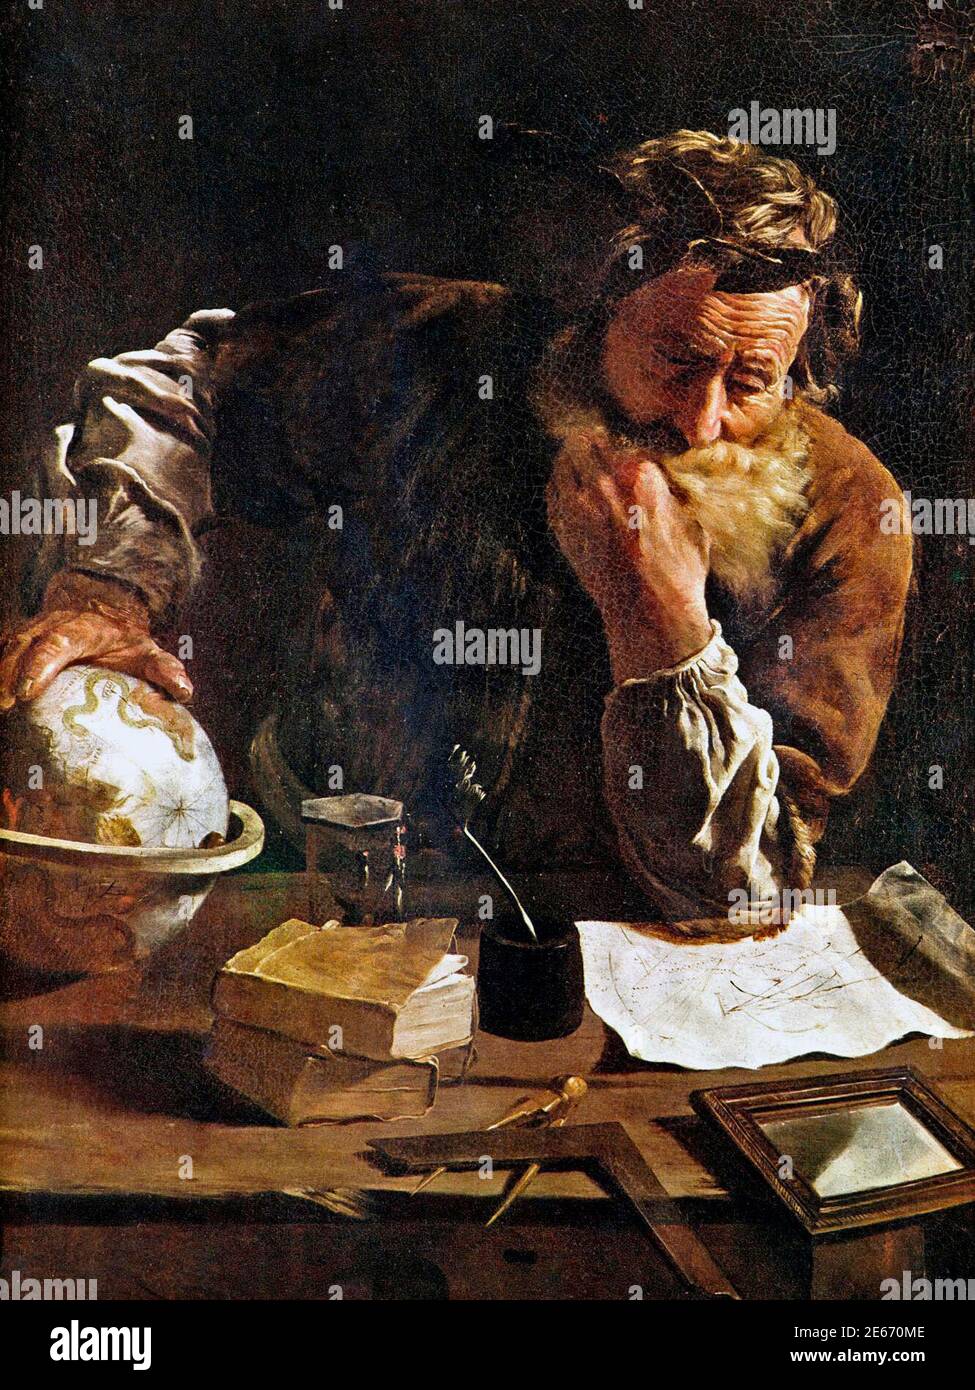 Archimedes Thoughtful (also known as Portrait of a Scholar) by Domenico Fetti, 1620. Archimedes is considered the most important physicist in antiquity. Stock Photo